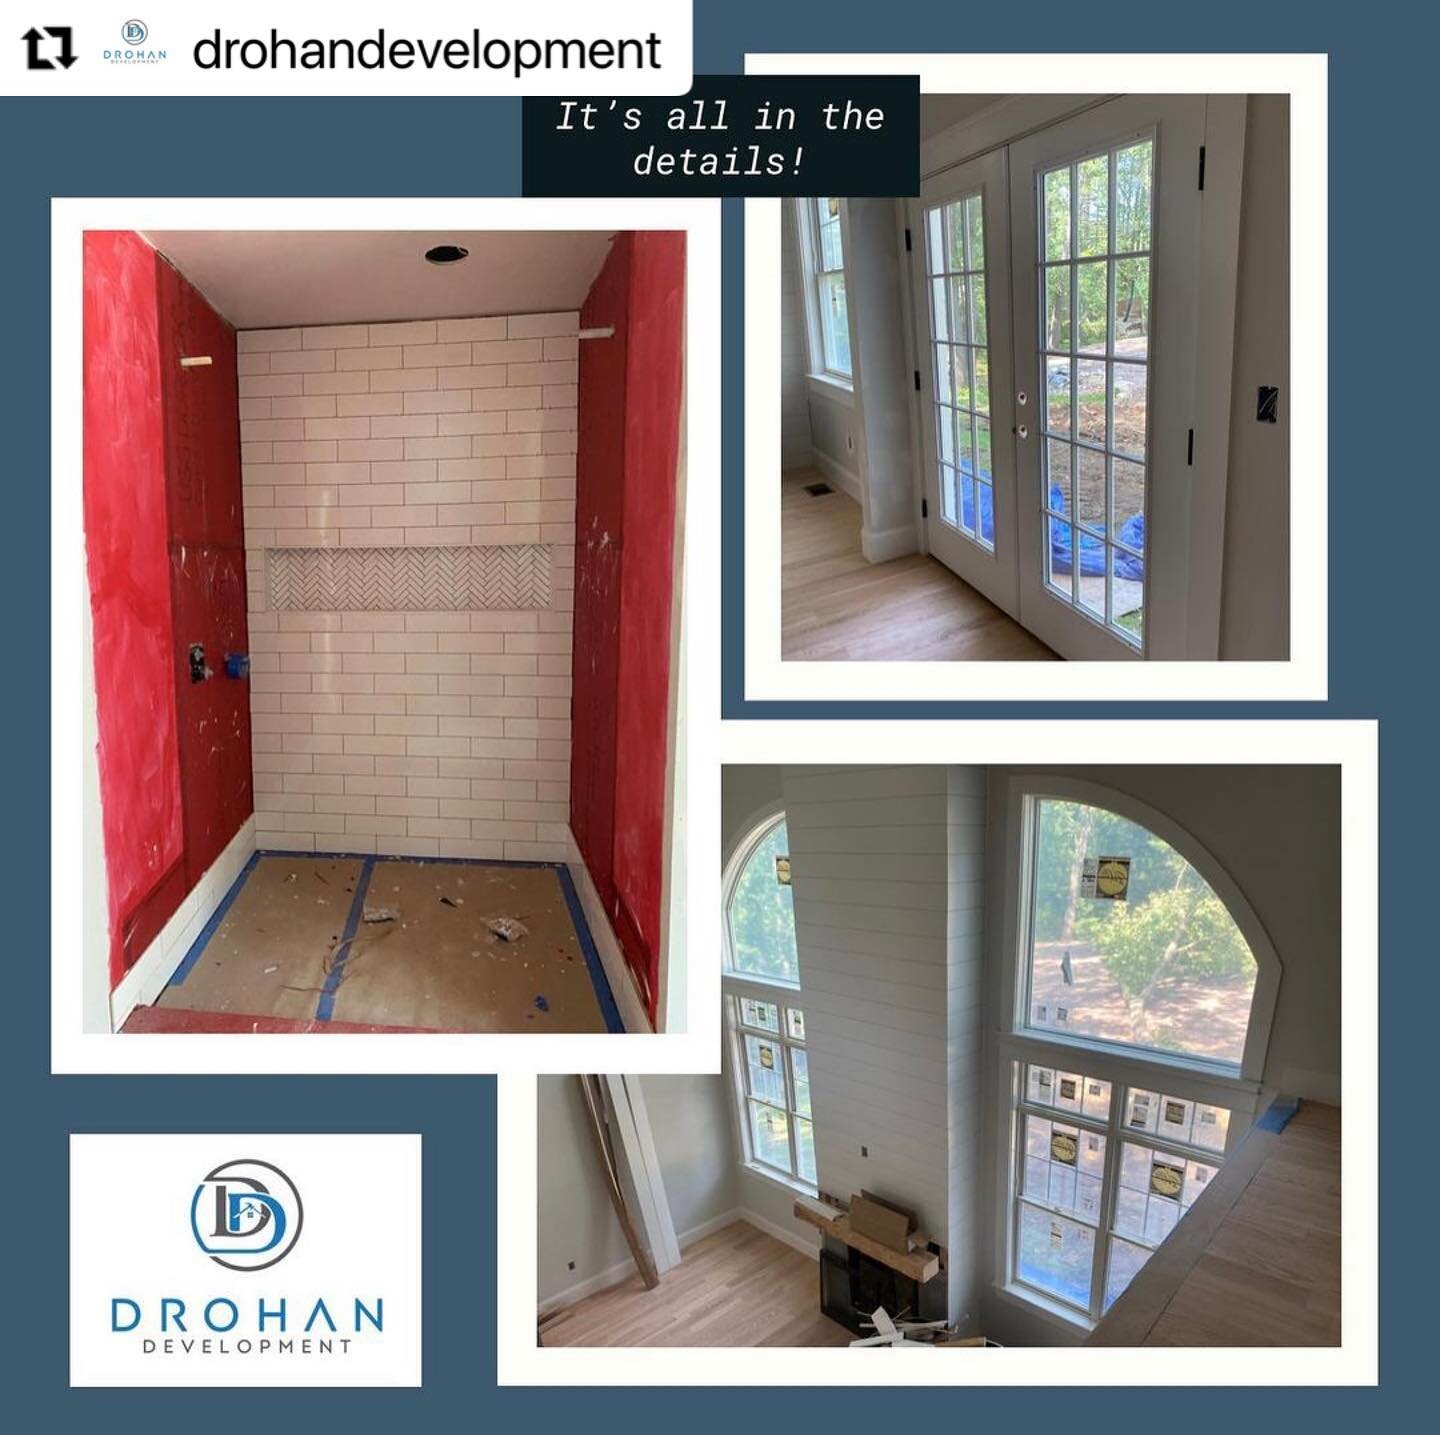 Beautiful Super White subway tile with the perfect herringbone niche! Thank you @drohandevelopment for sharing, we cannot wait to see the finished product!
&bull;
&bull;
#Repost @drohandevelopment with @make_repost
・・・
The art of Drohan design&hellip